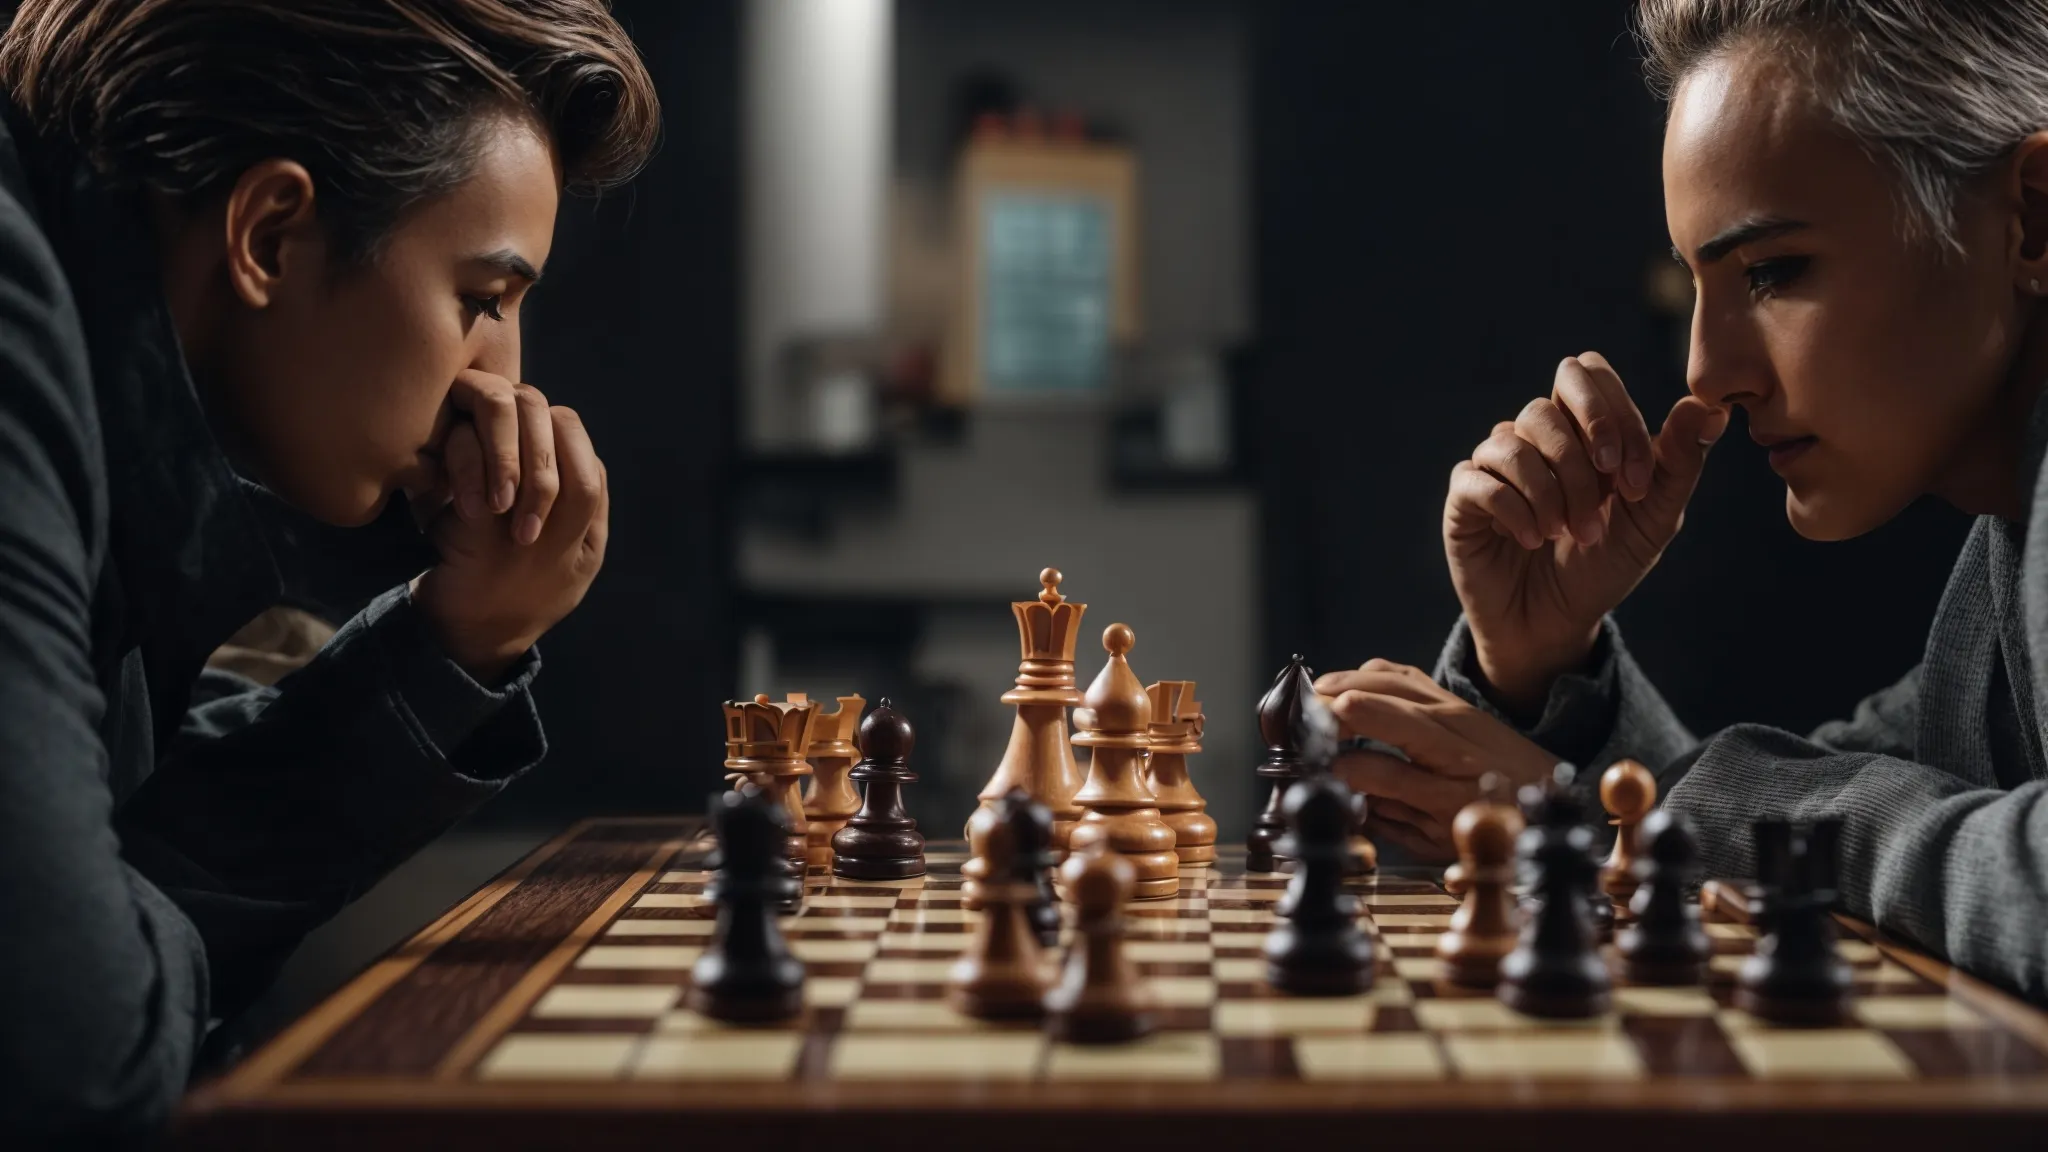 two chess players pondering their next move over a board that symbolizes the strategic decision-making in seo versus content marketing.